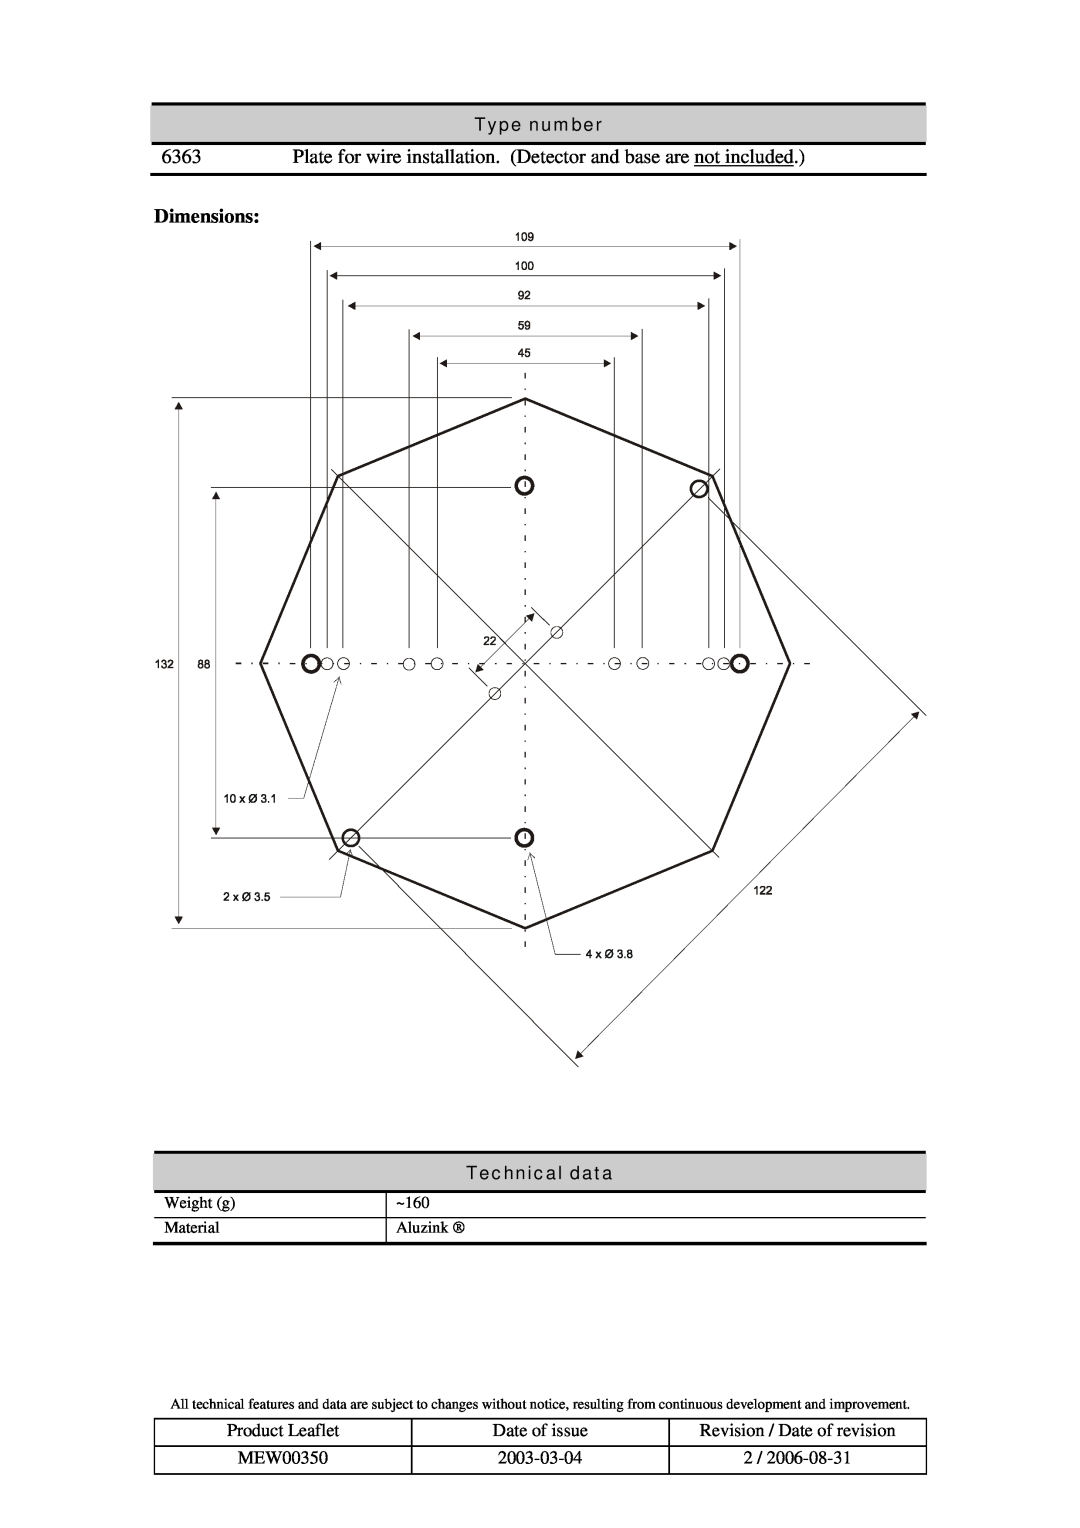 Panasonic 6363 manual Dimensions, Type number, Technical data, Weight g, ~160, Material, Aluzink 